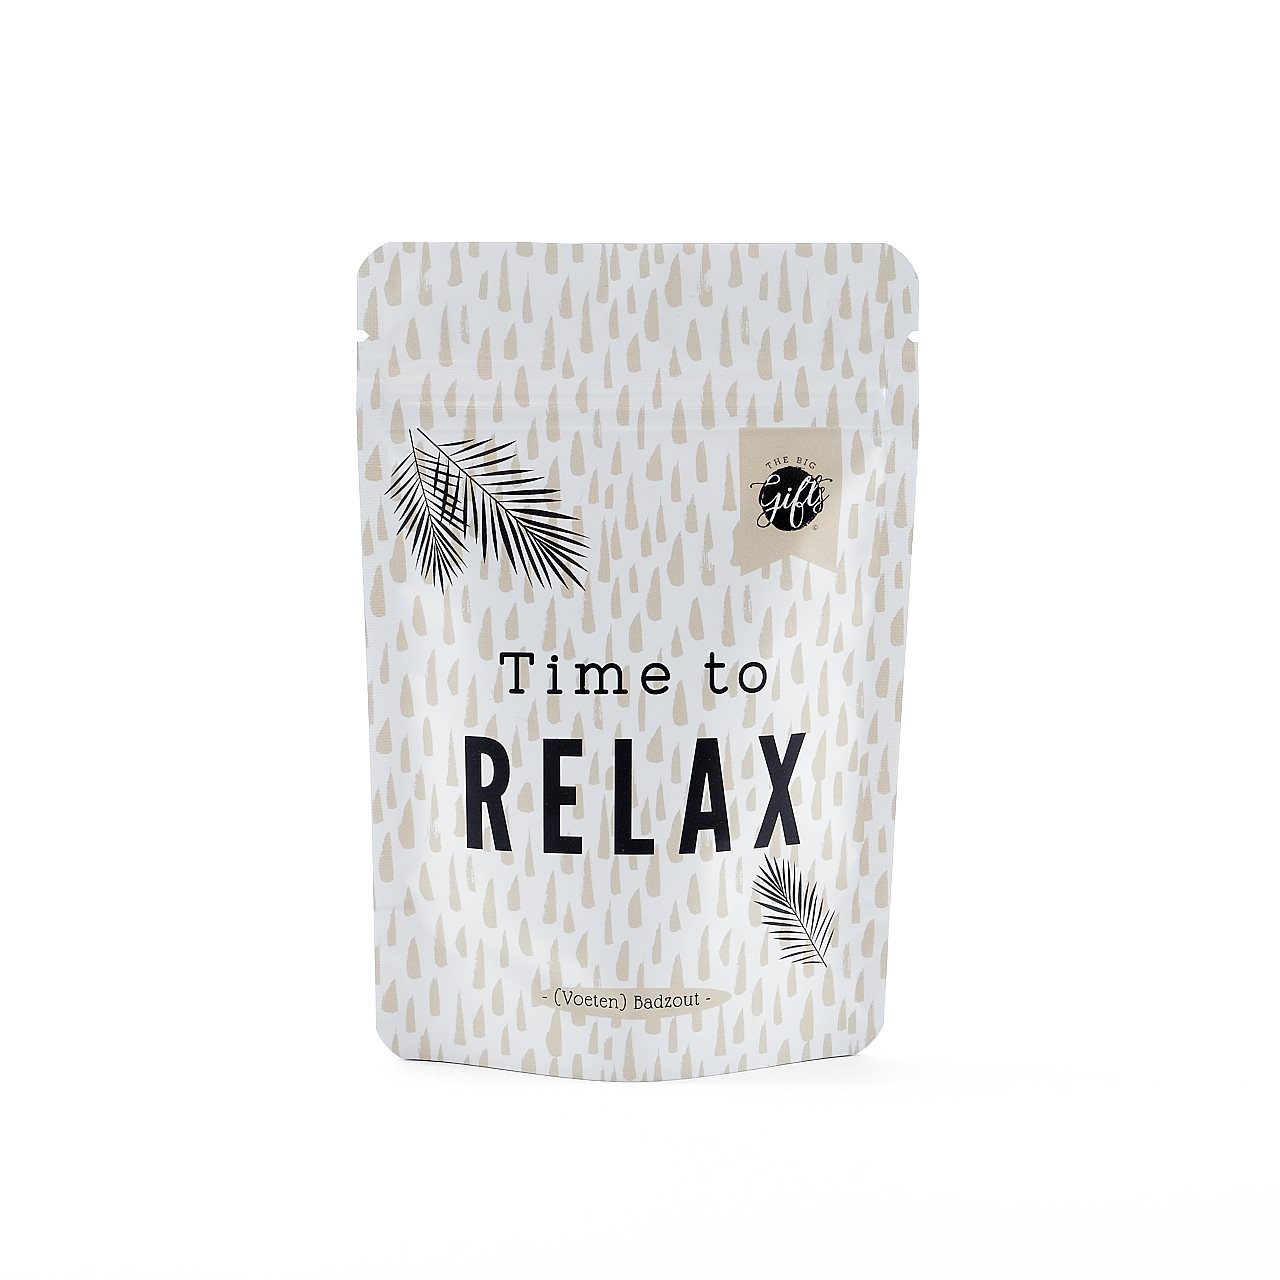 Badzout Time to Relax – White